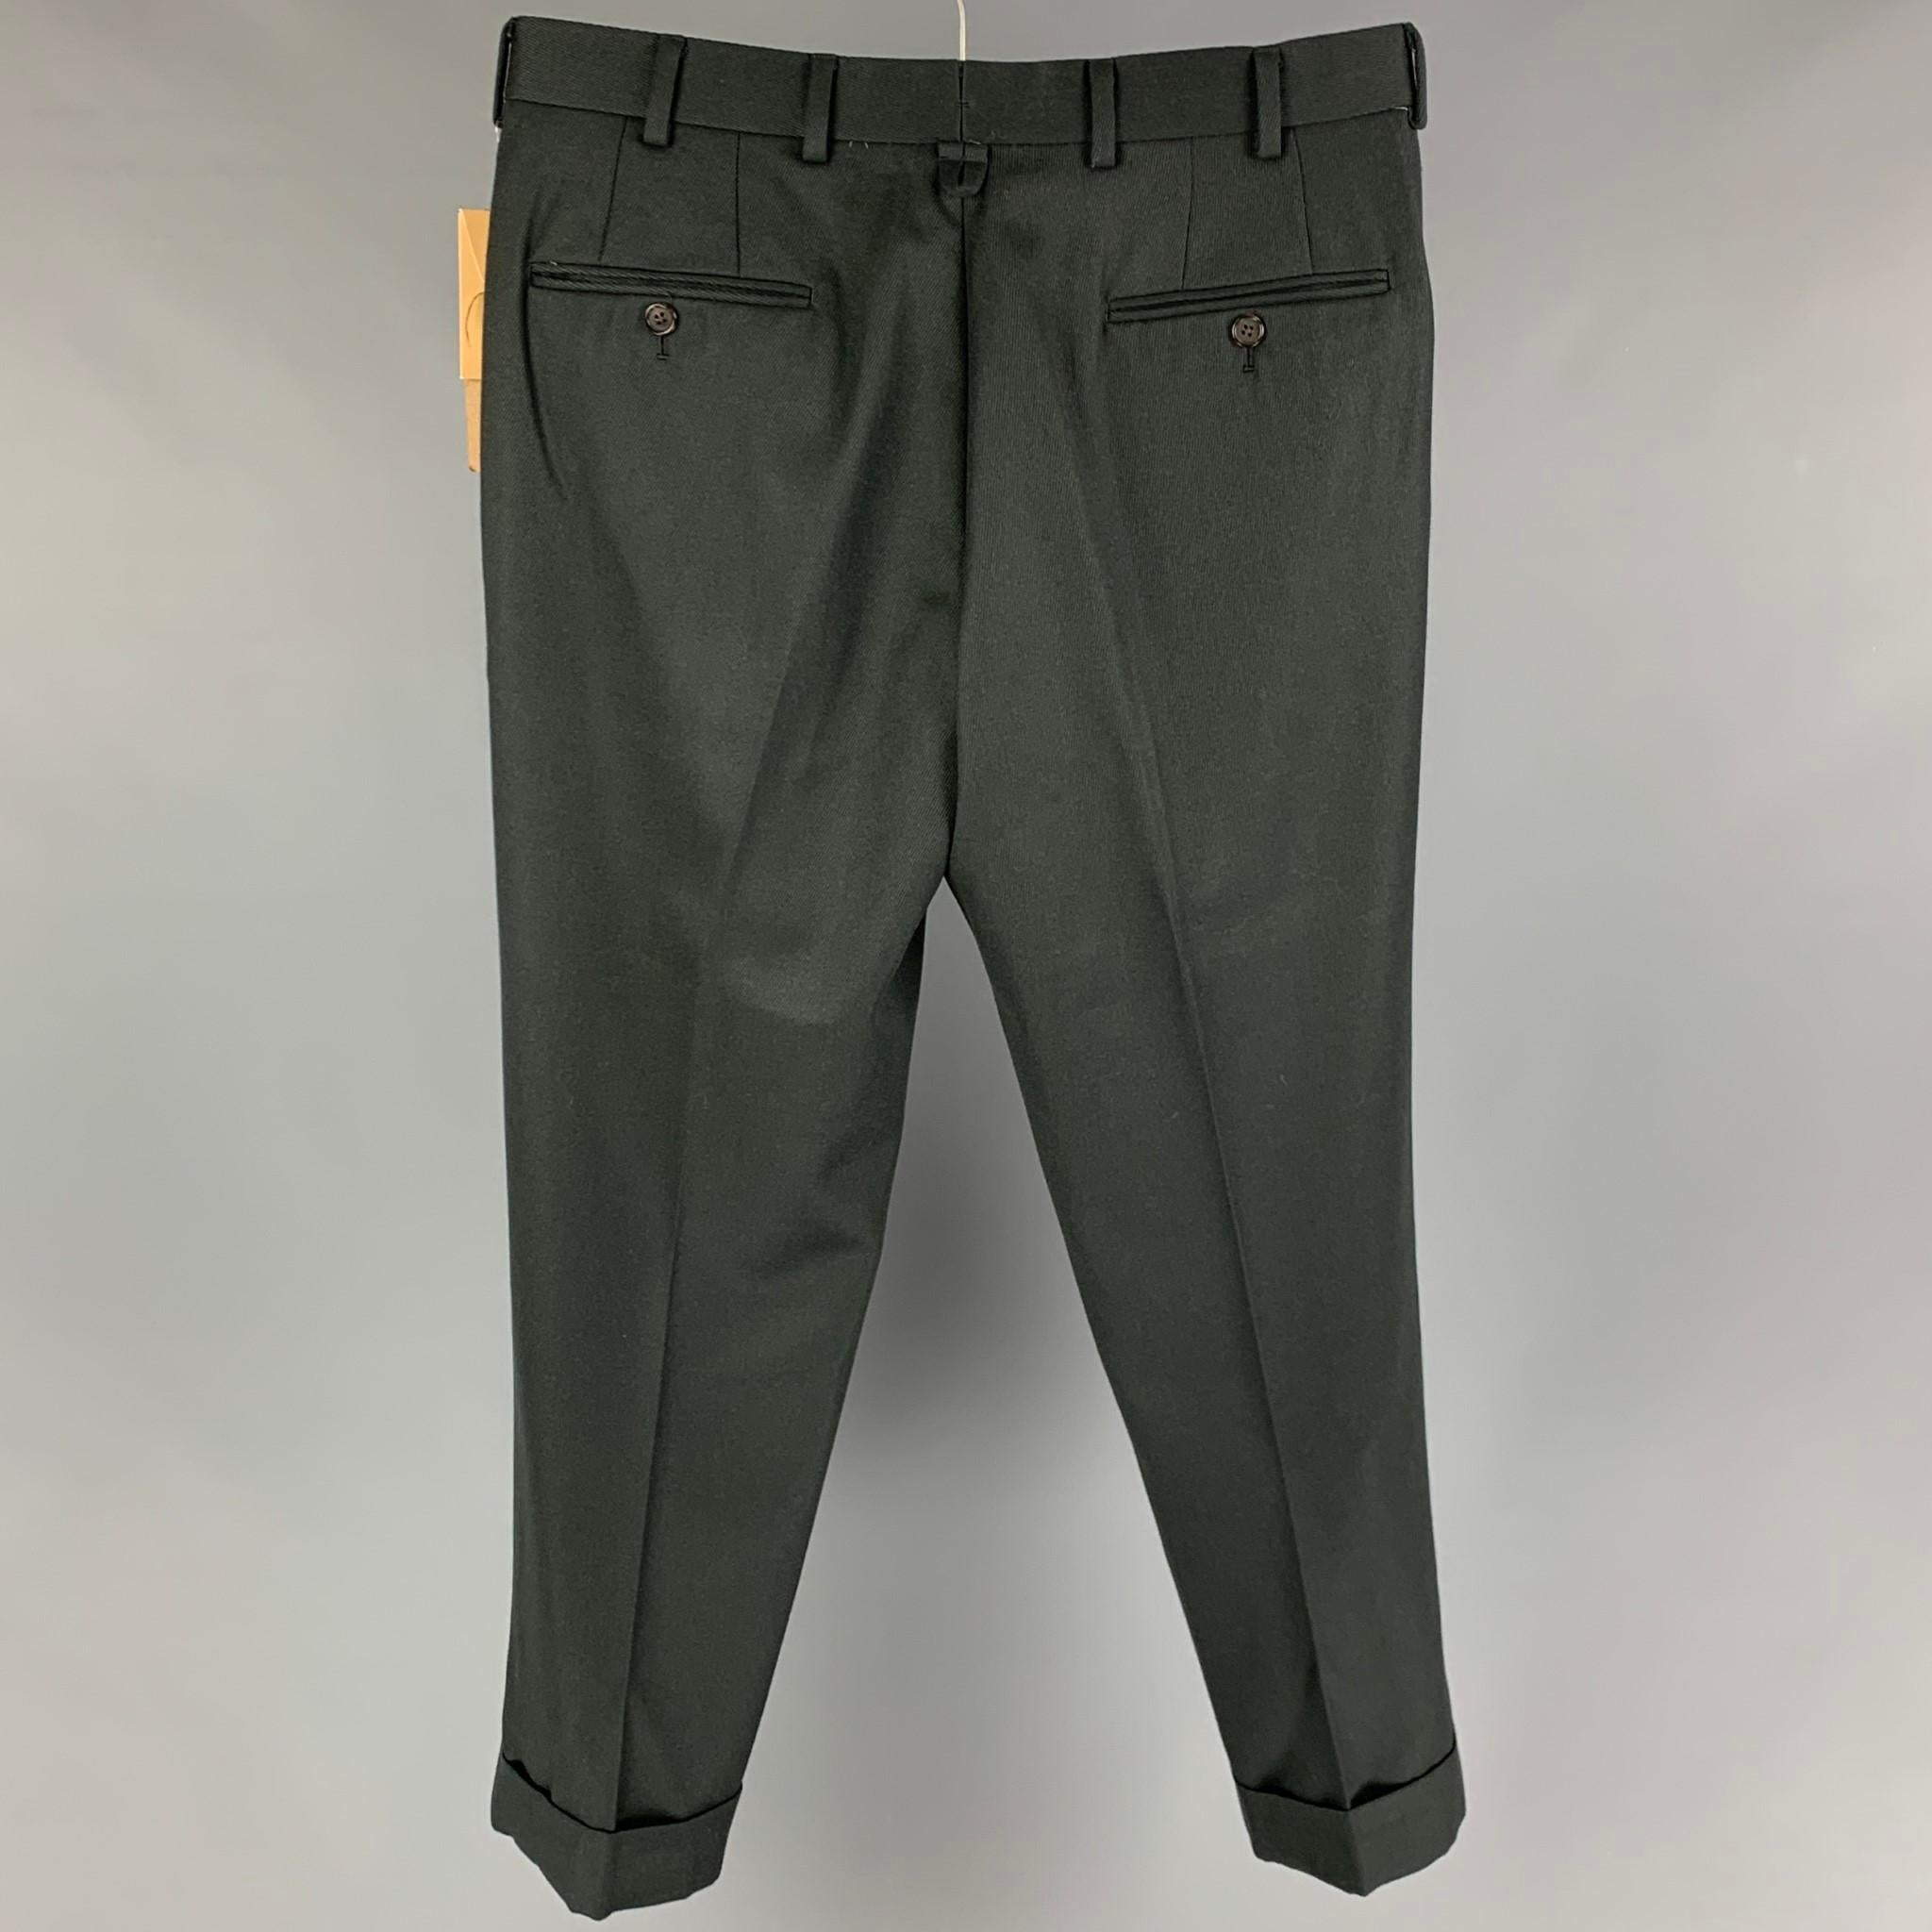 BLACK FLEECE dress pants comes in a forest green wool featuring a flat front, cuffed leg, front tab, and a button fly closure. 

New with tags.
Marked: BB2

Measurements:

Waist: 34 in.
Rise: 10.5 in.
Inseam: 29 in.